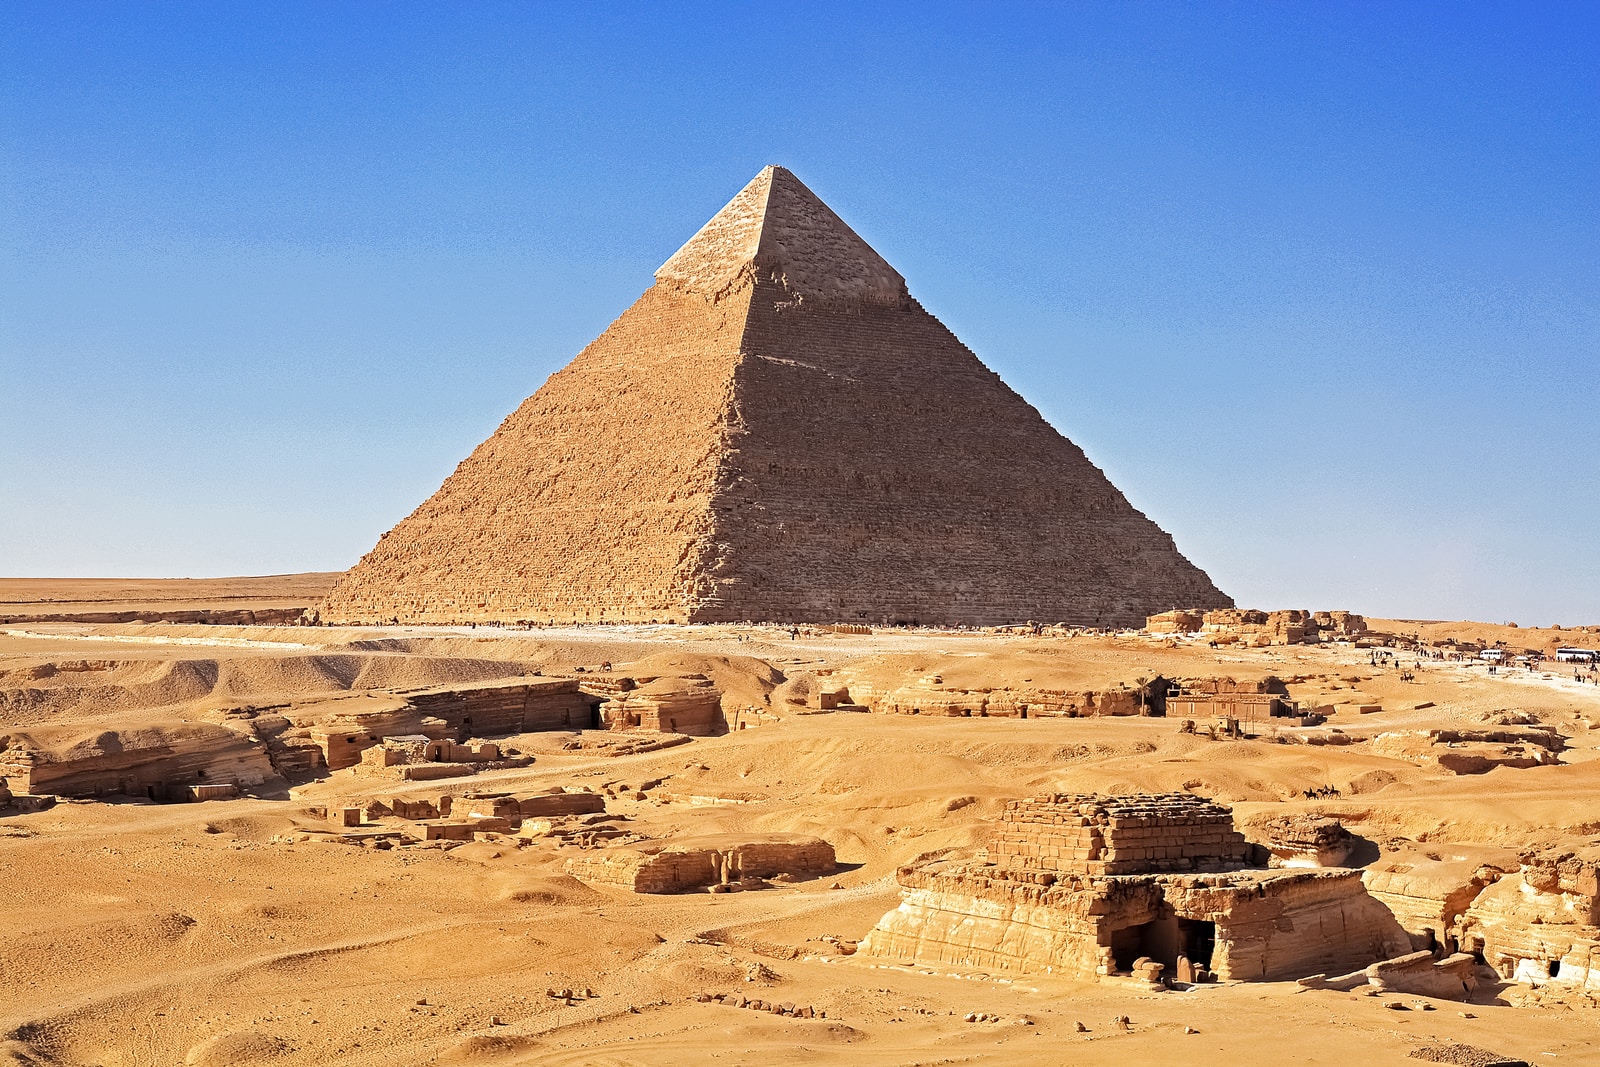 pyramid of giza under blue sky during daytime